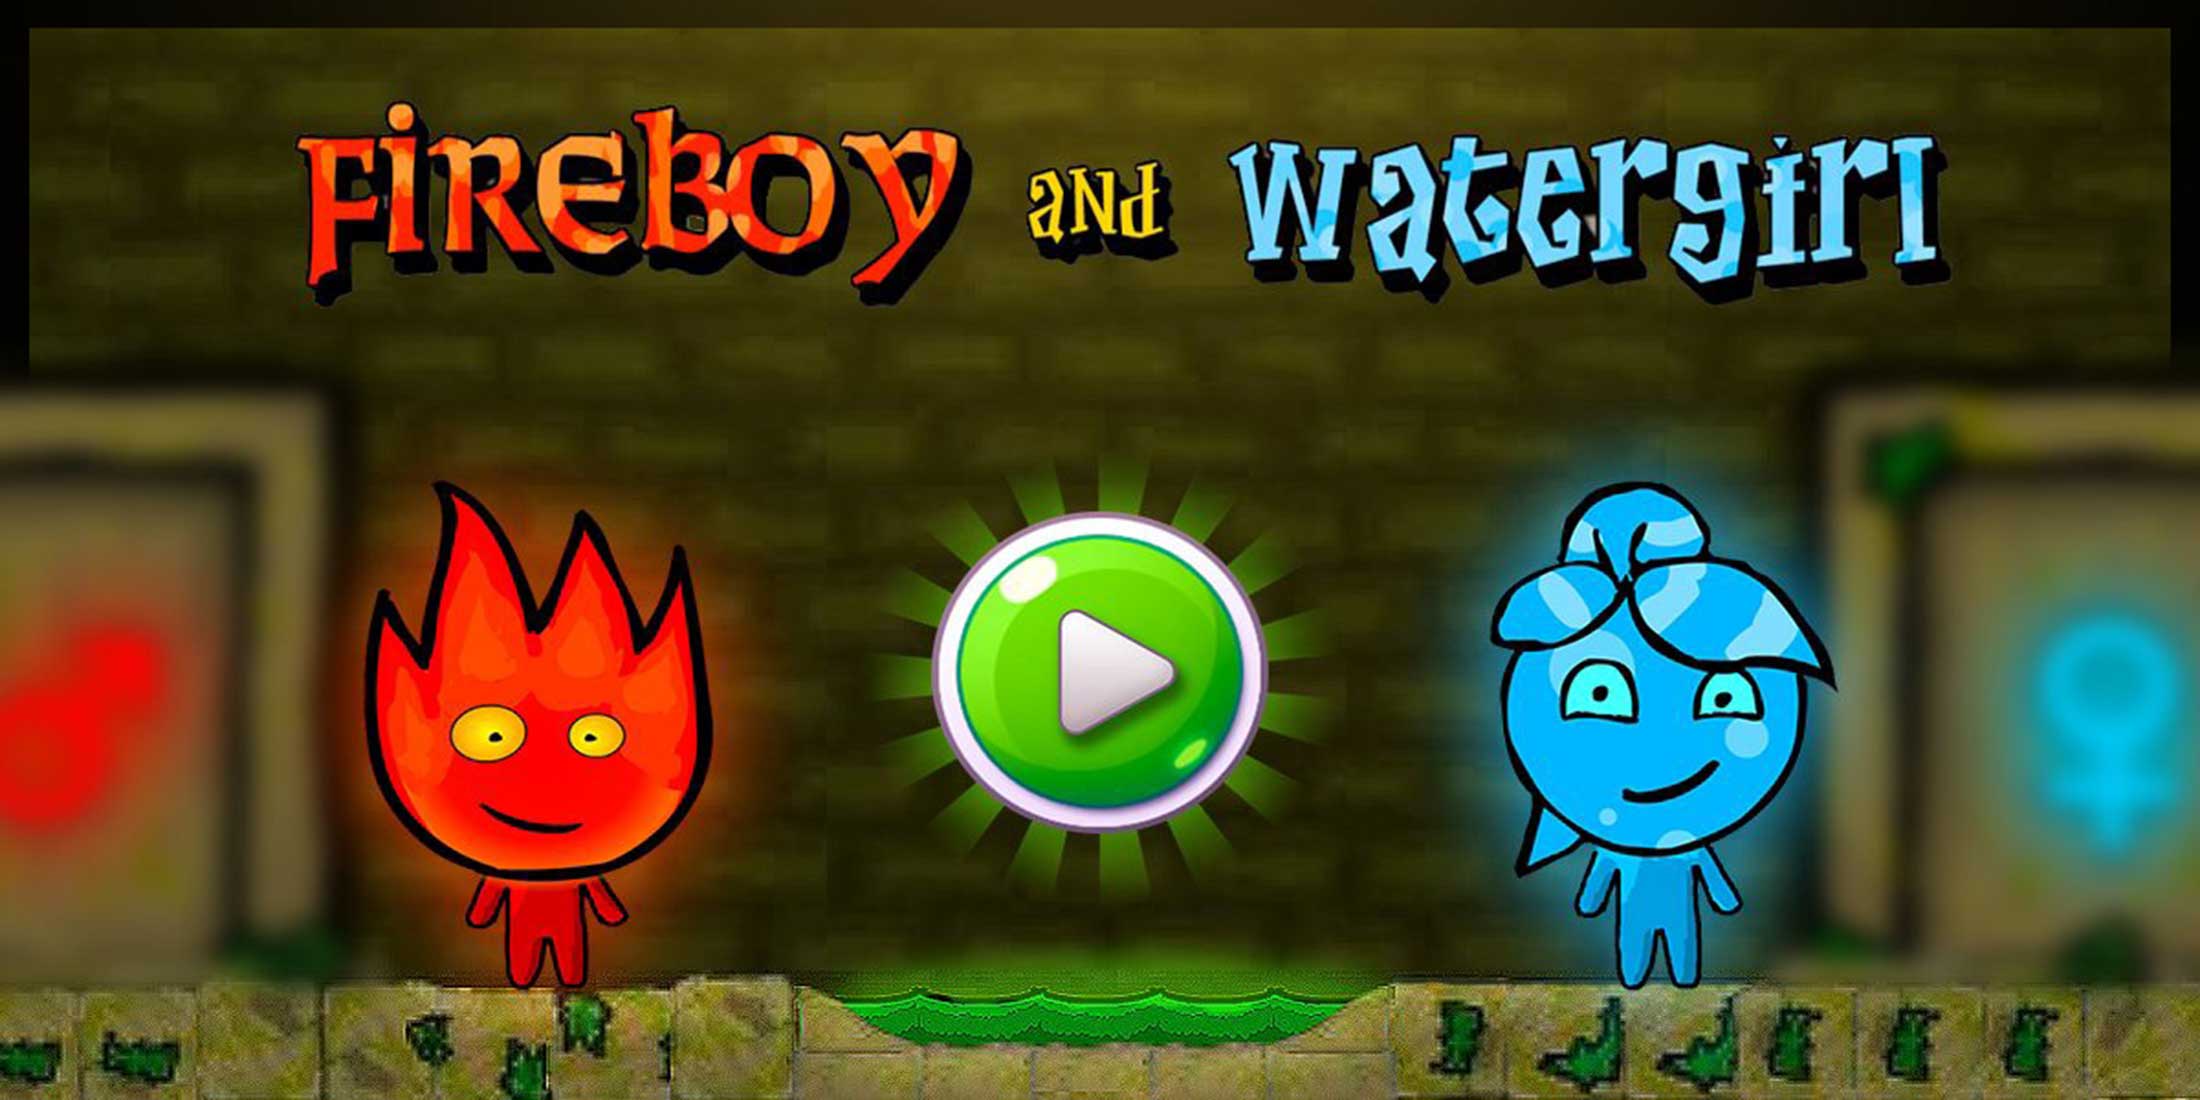 Fireboy and Watergirl 2 - Light Temple